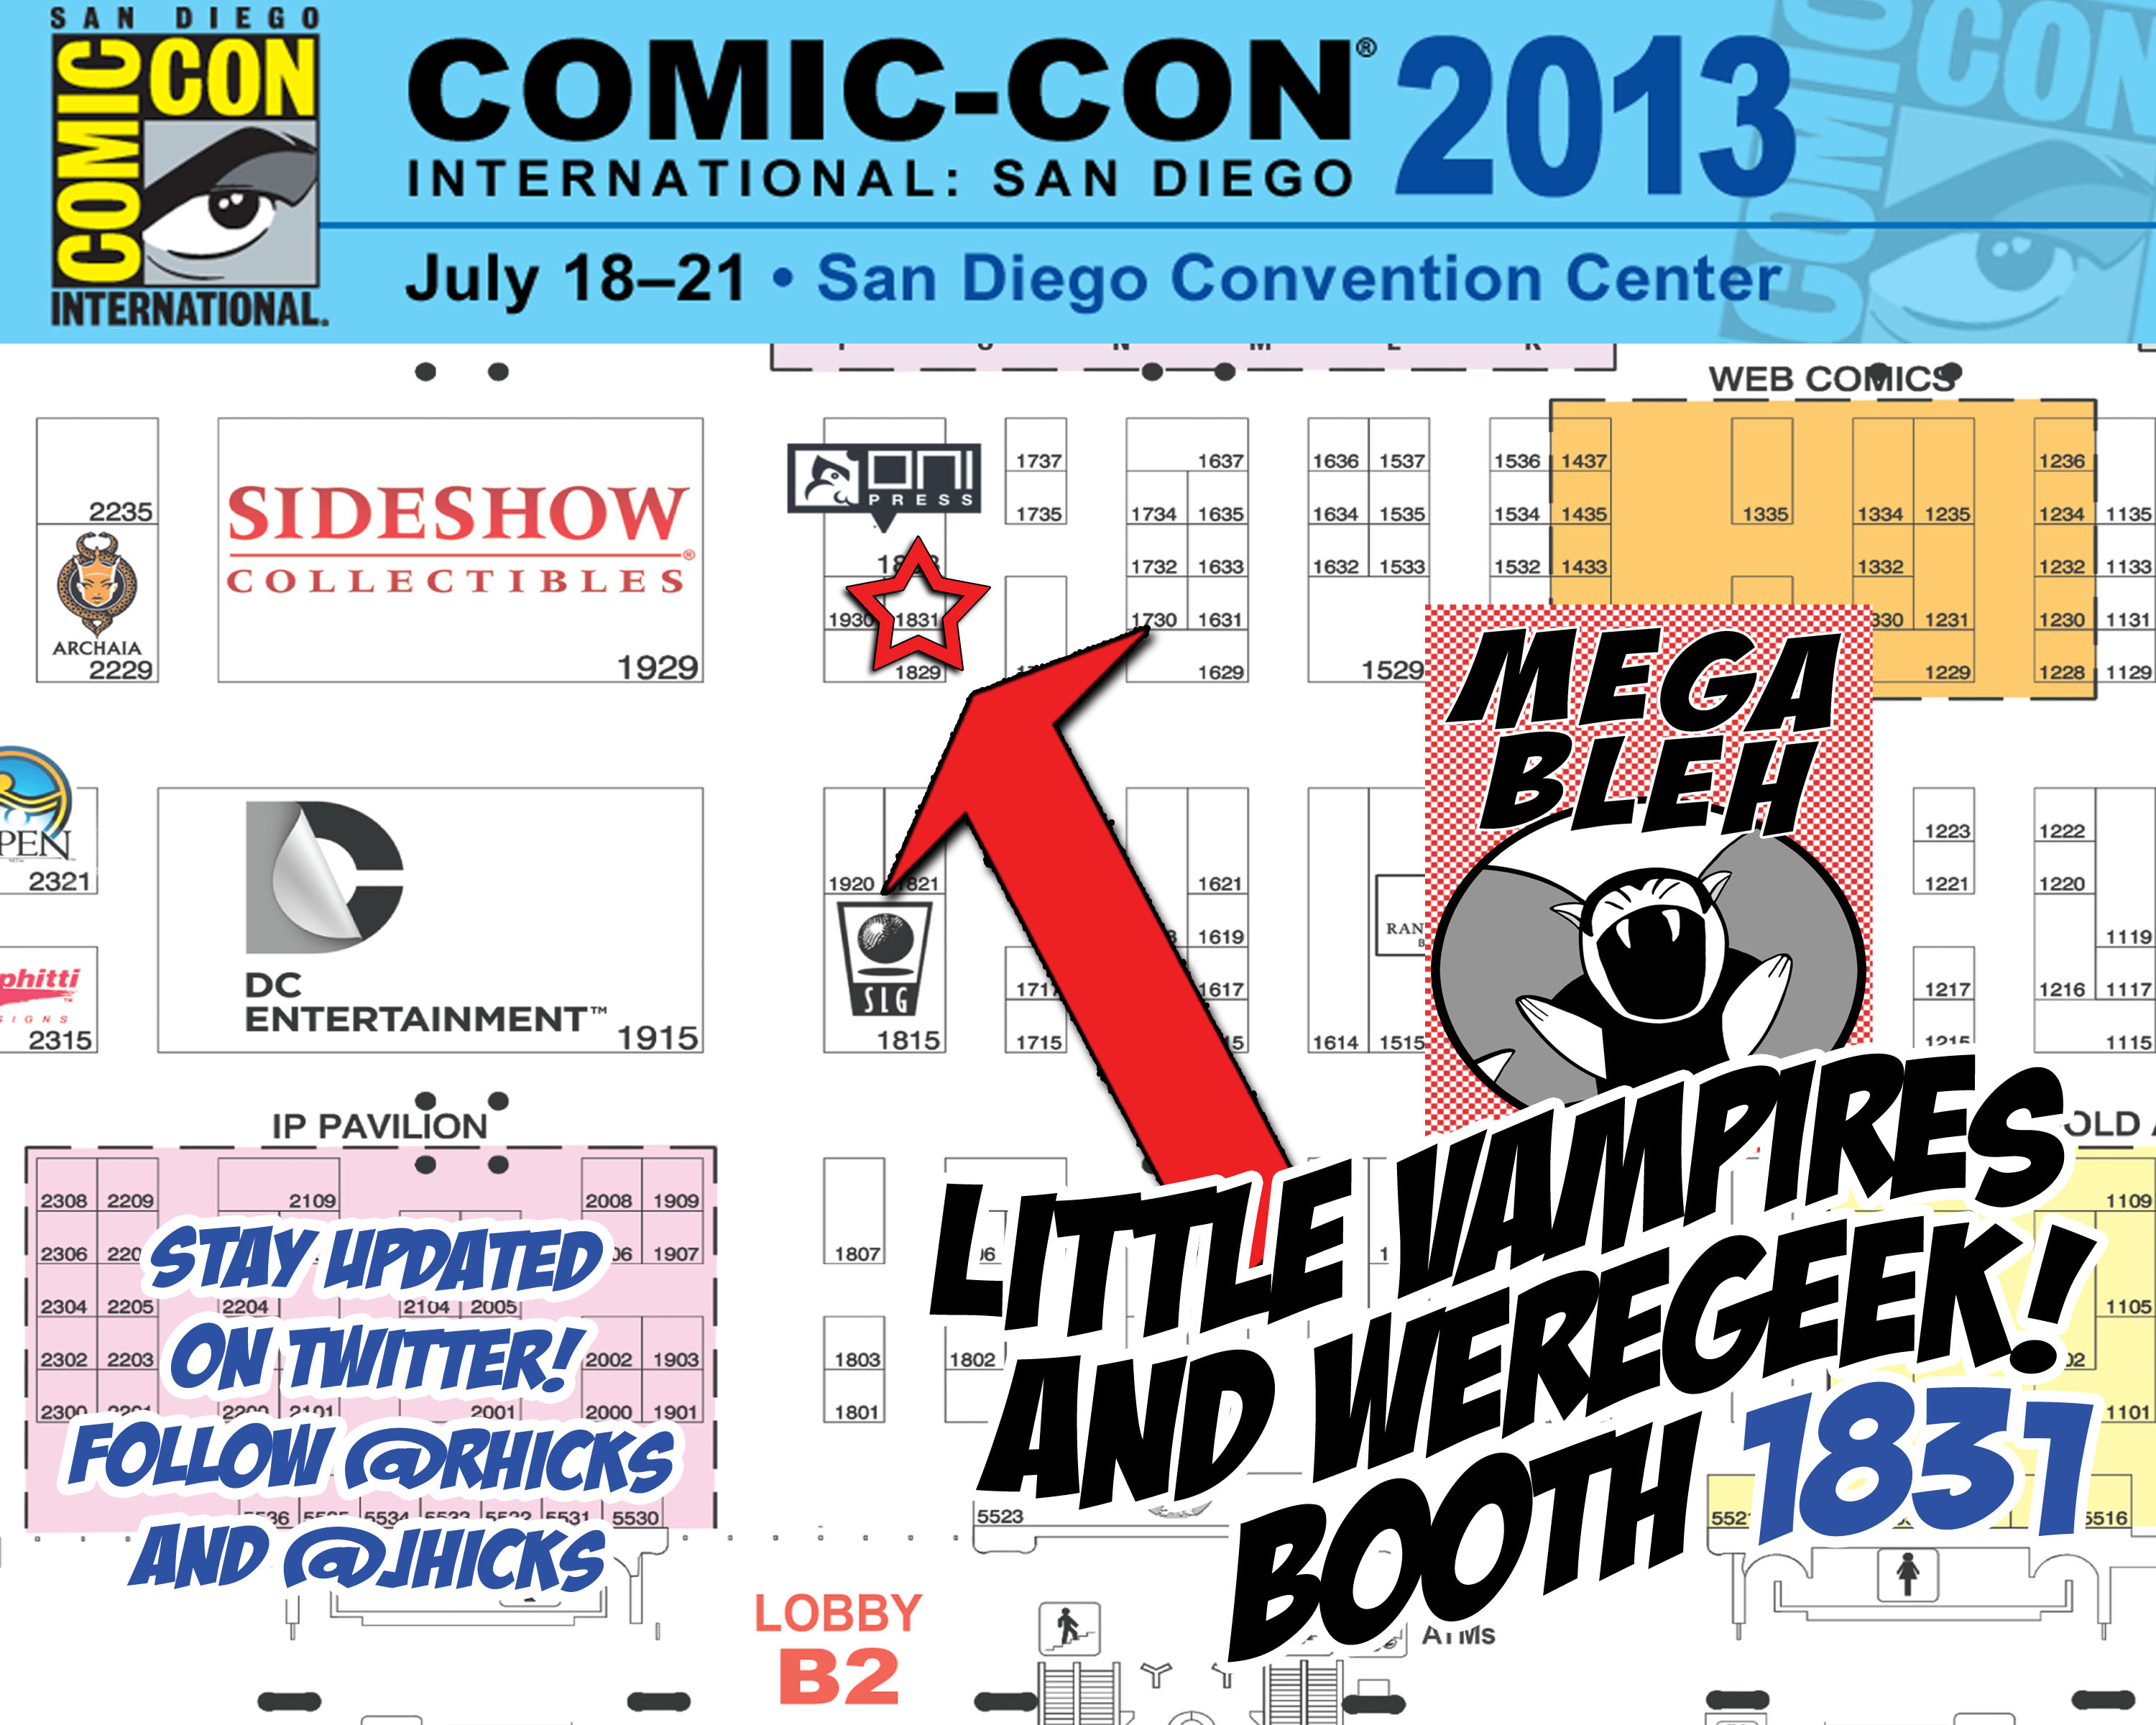 San Diego Comic-Con 2013 vendor floor map with the Little Vampires booth highlighted